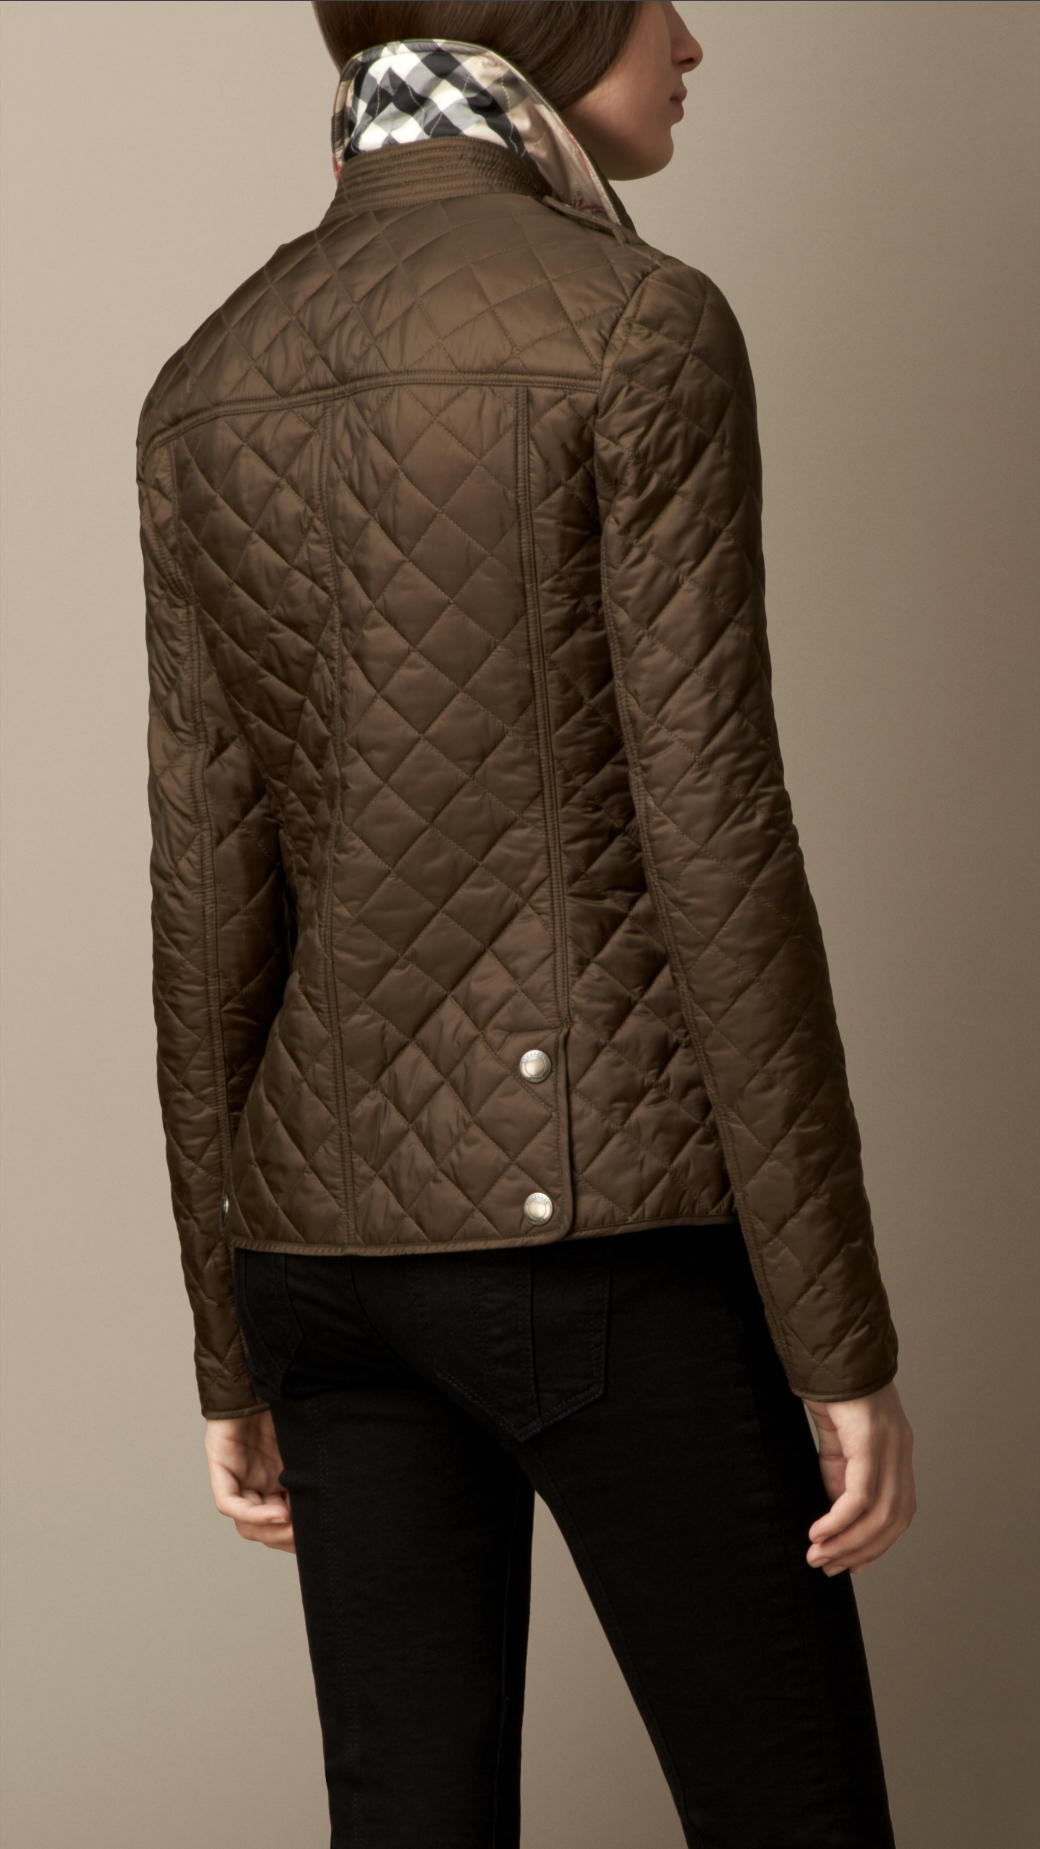 Lyst - Burberry Diamond Quilted Jacket in Natural